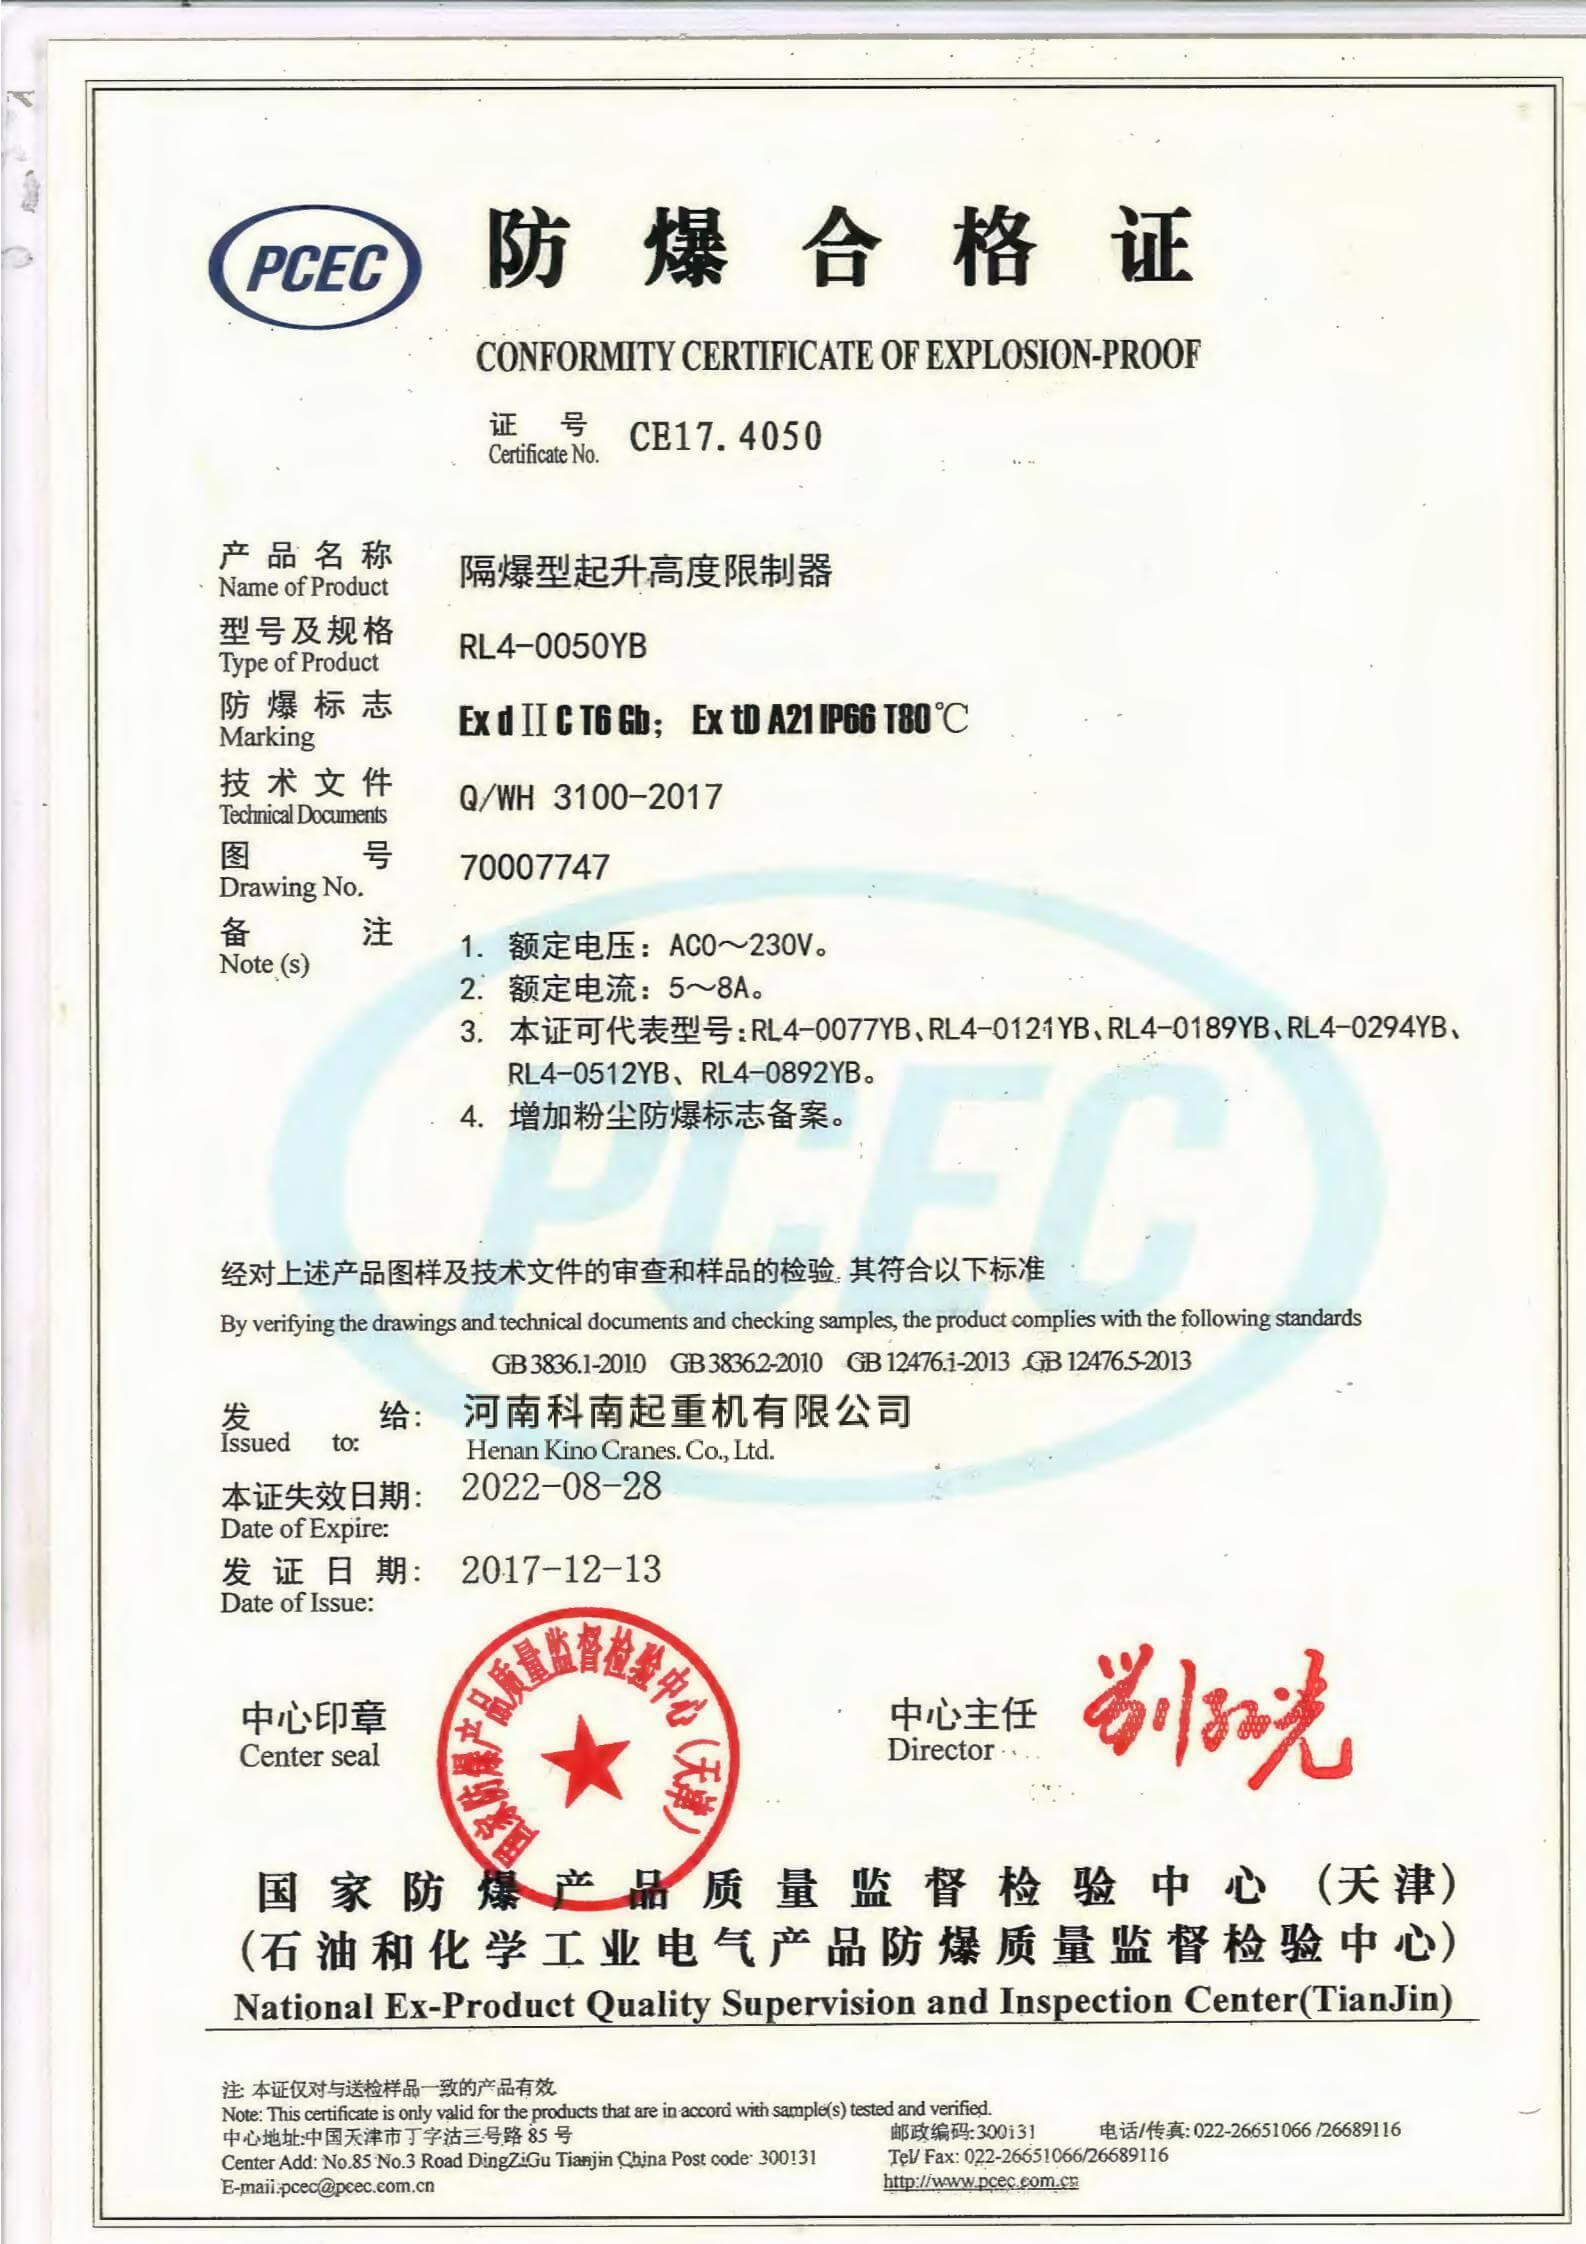 HS071V01-KINO Explosion-proof Lifting Limit Certificate